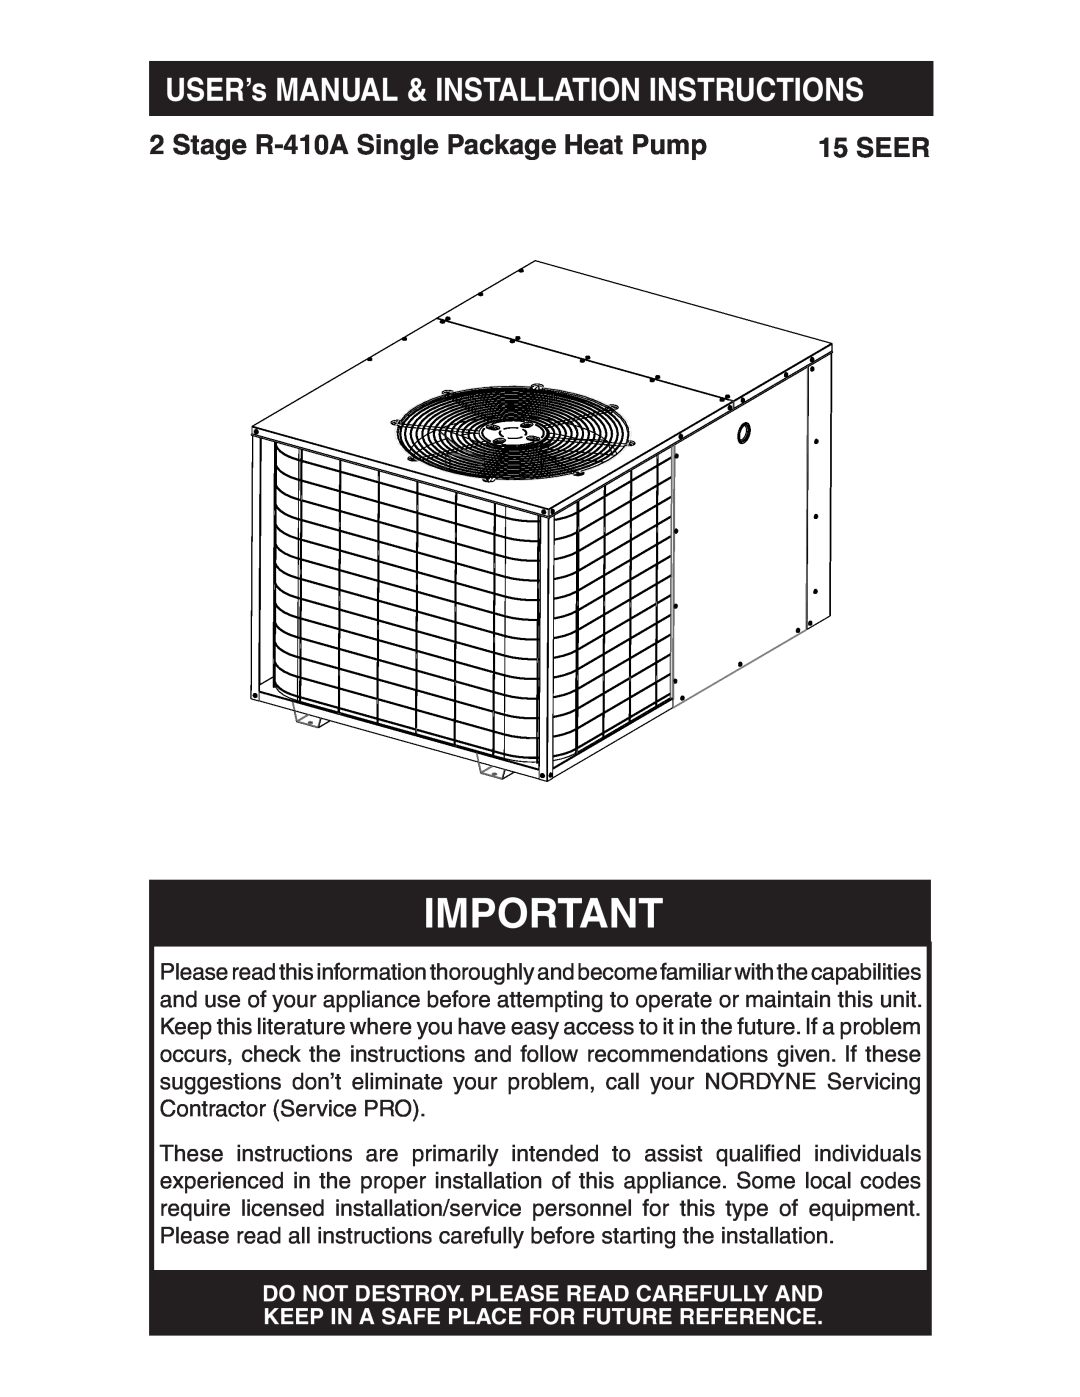 Nordyne user manual Stage R-410ASingle Package Heat Pump, Seer, Do Not Destroy. Please Read Carefully And 